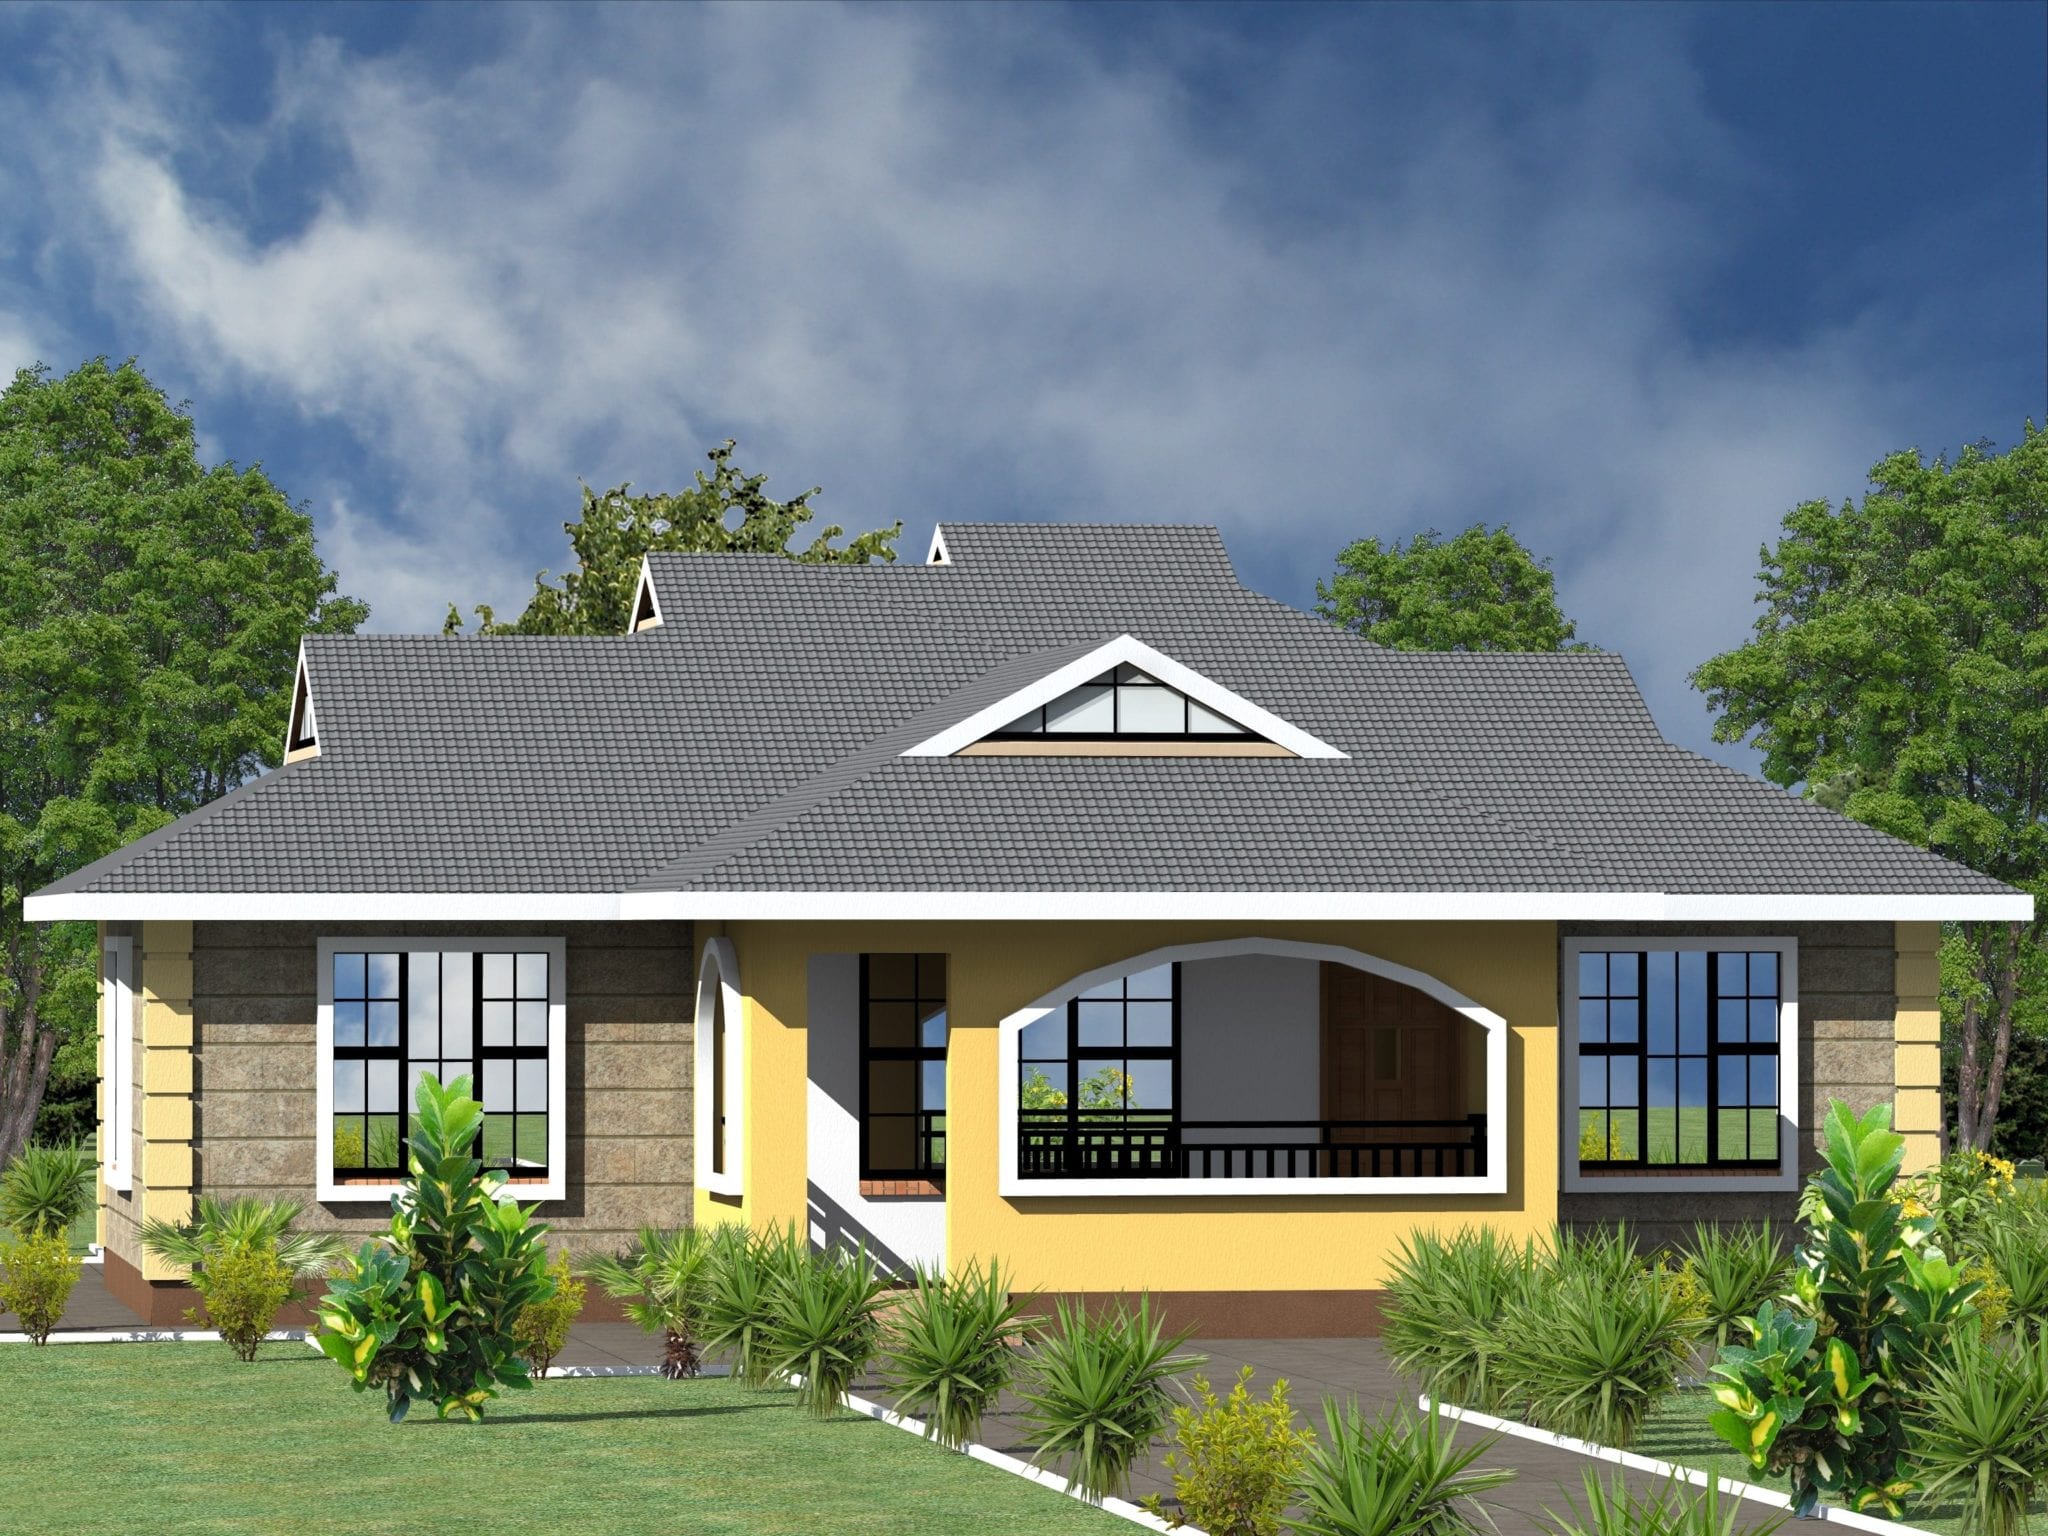 50 Low Cost 3 Bedroom House Plans And Designs In Uganda Most Popular